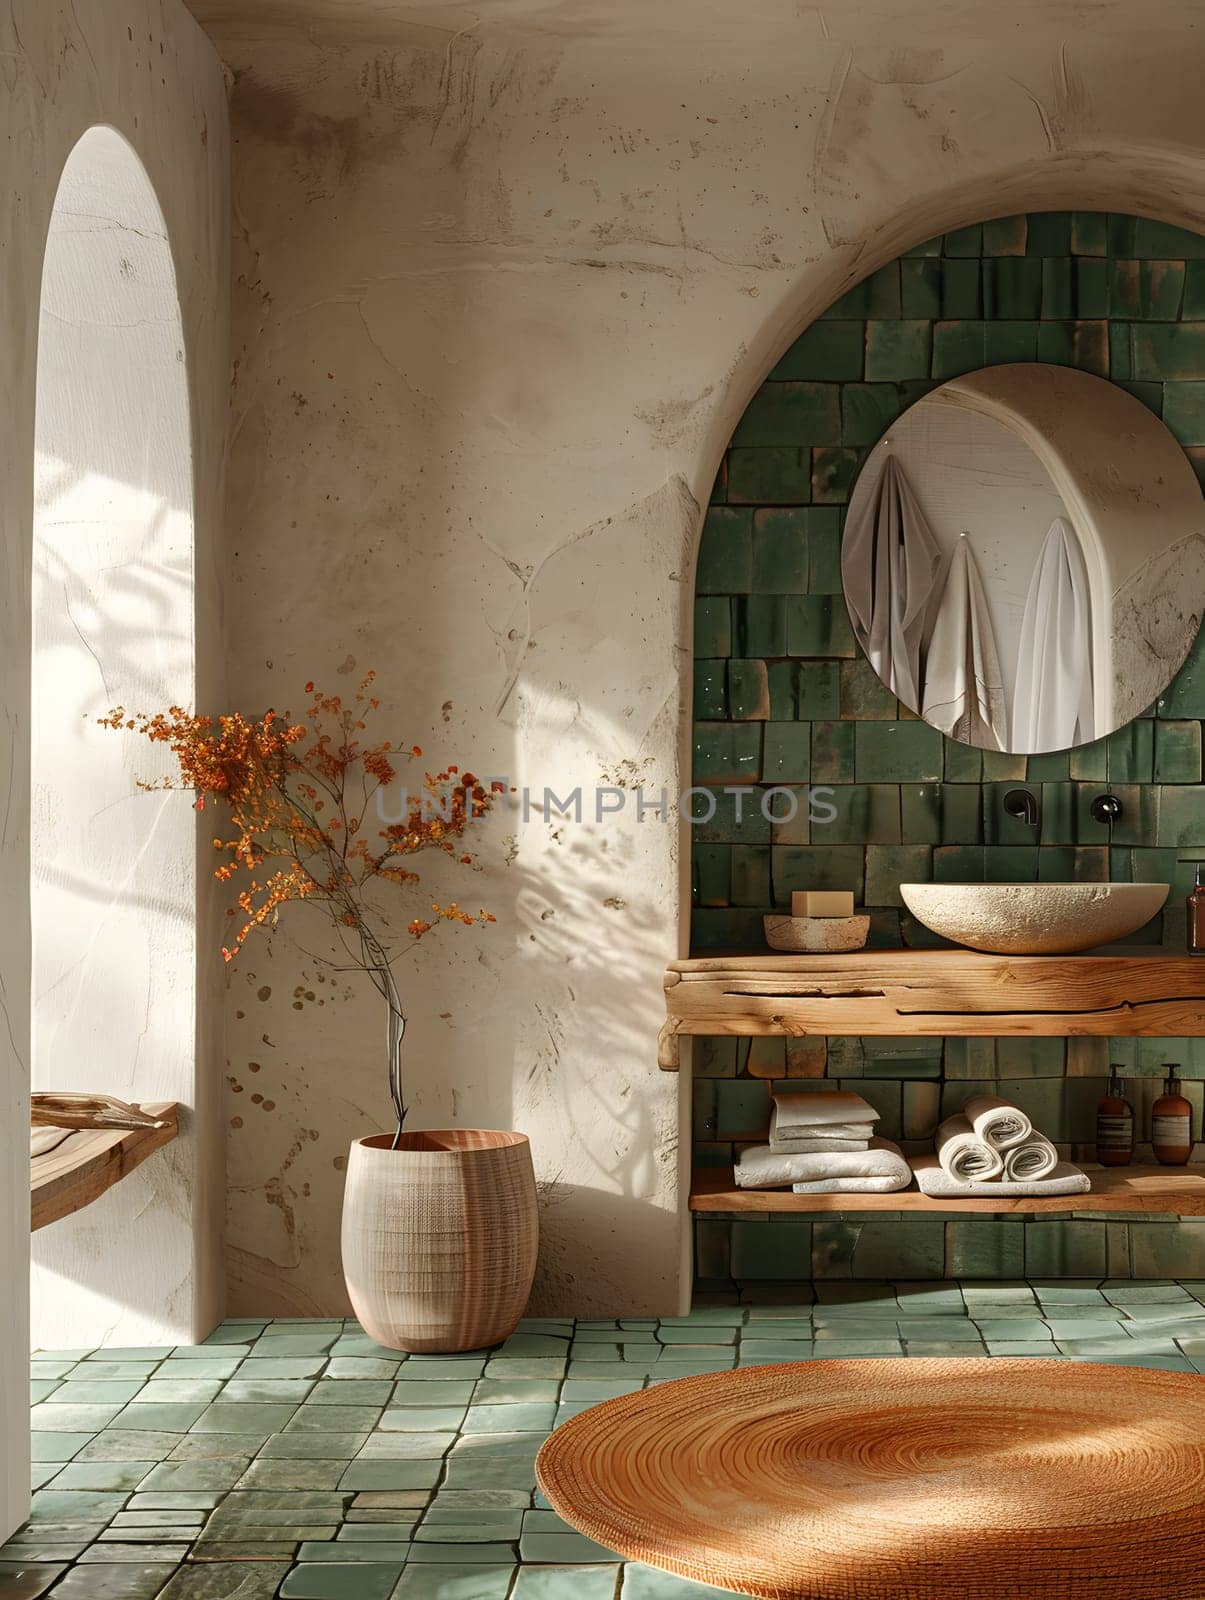 Bathroom interior with green tiled walls, sink, and mirror by Nadtochiy